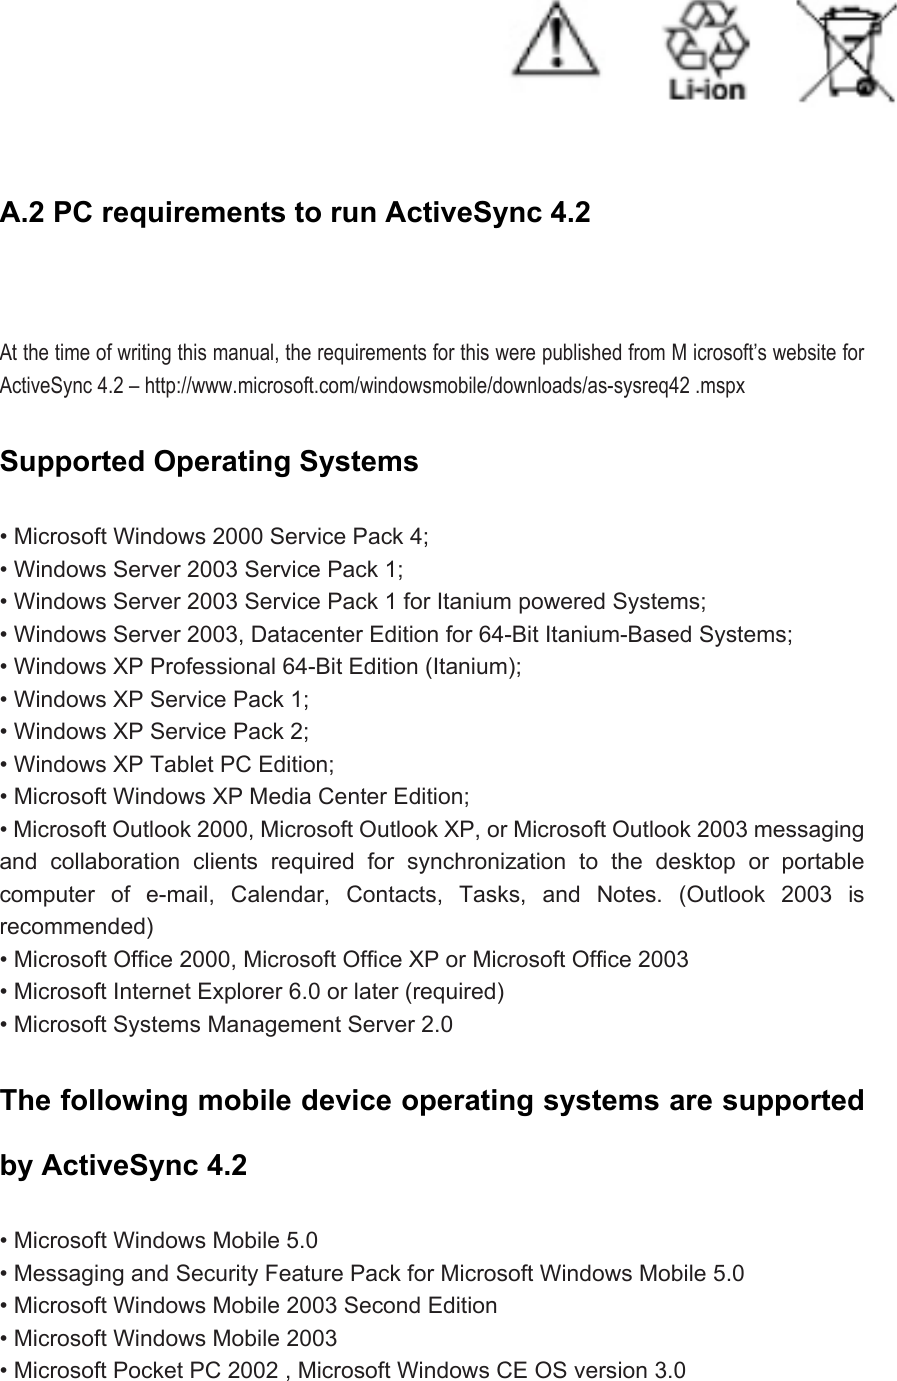  A.2 PC requirements to run ActiveSync 4.2     At the time of writing this manual, the requirements for this were published from M icrosoft’s website for ActiveSync 4.2 – http://www.microsoft.com/windowsmobile/downloads/as-sysreq42 .mspx Supported Operating Systems   • Microsoft Windows 2000 Service Pack 4;   • Windows Server 2003 Service Pack 1;   • Windows Server 2003 Service Pack 1 for Itanium powered Systems;   • Windows Server 2003, Datacenter Edition for 64-Bit Itanium-Based Systems;   • Windows XP Professional 64-Bit Edition (Itanium);   • Windows XP Service Pack 1;   • Windows XP Service Pack 2;   • Windows XP Tablet PC Edition;   • Microsoft Windows XP Media Center Edition;   • Microsoft Outlook 2000, Microsoft Outlook XP, or Microsoft Outlook 2003 messaging and collaboration clients required for synchronization to the desktop or portable computer of e-mail, Calendar, Contacts, Tasks, and Notes. (Outlook 2003 is recommended)  • Microsoft Office 2000, Microsoft Office XP or Microsoft Office 2003   • Microsoft Internet Explorer 6.0 or later (required)   • Microsoft Systems Management Server 2.0 The following mobile device operating systems are supported by ActiveSync 4.2   • Microsoft Windows Mobile 5.0   • Messaging and Security Feature Pack for Microsoft Windows Mobile 5.0   • Microsoft Windows Mobile 2003 Second Edition   • Microsoft Windows Mobile 2003   • Microsoft Pocket PC 2002 , Microsoft Windows CE OS version 3.0   